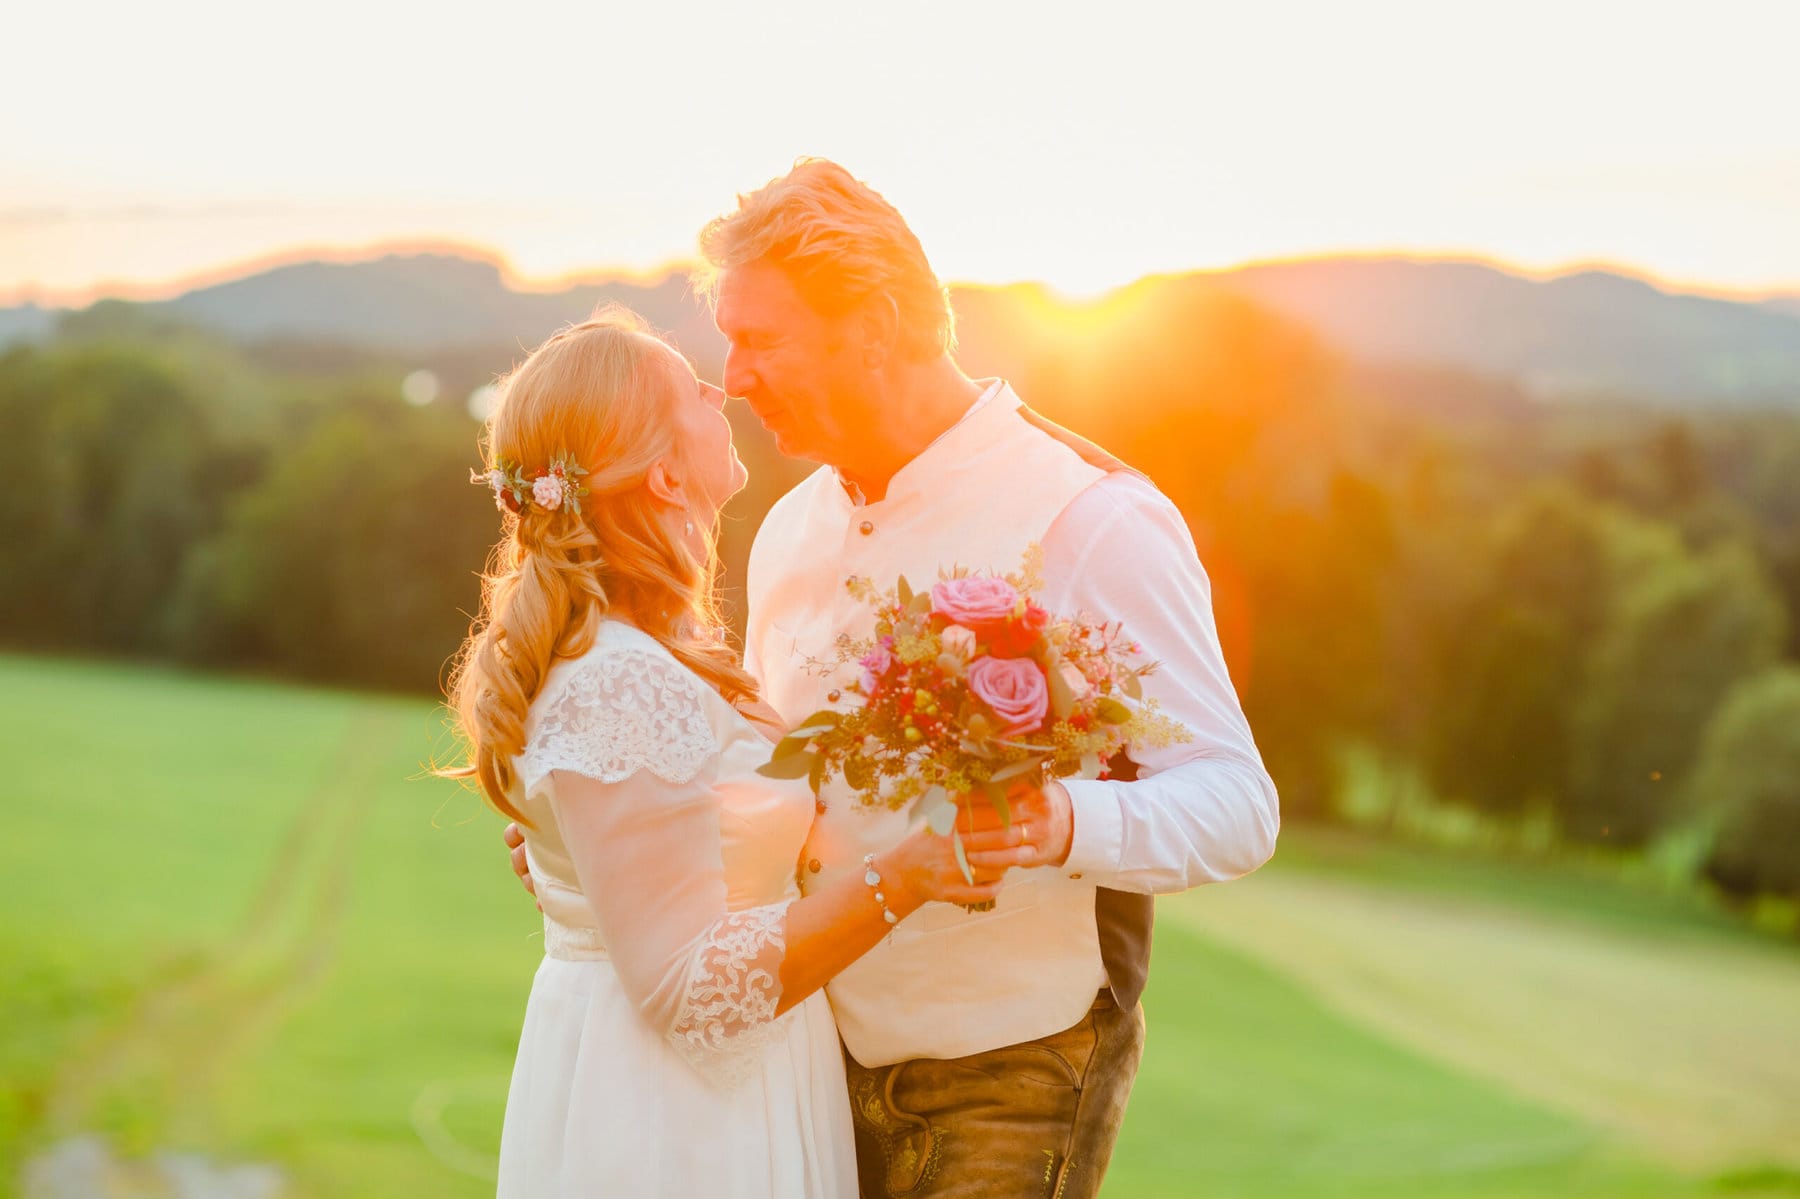 Wedding picture bride and groom sunset sunspot meadow